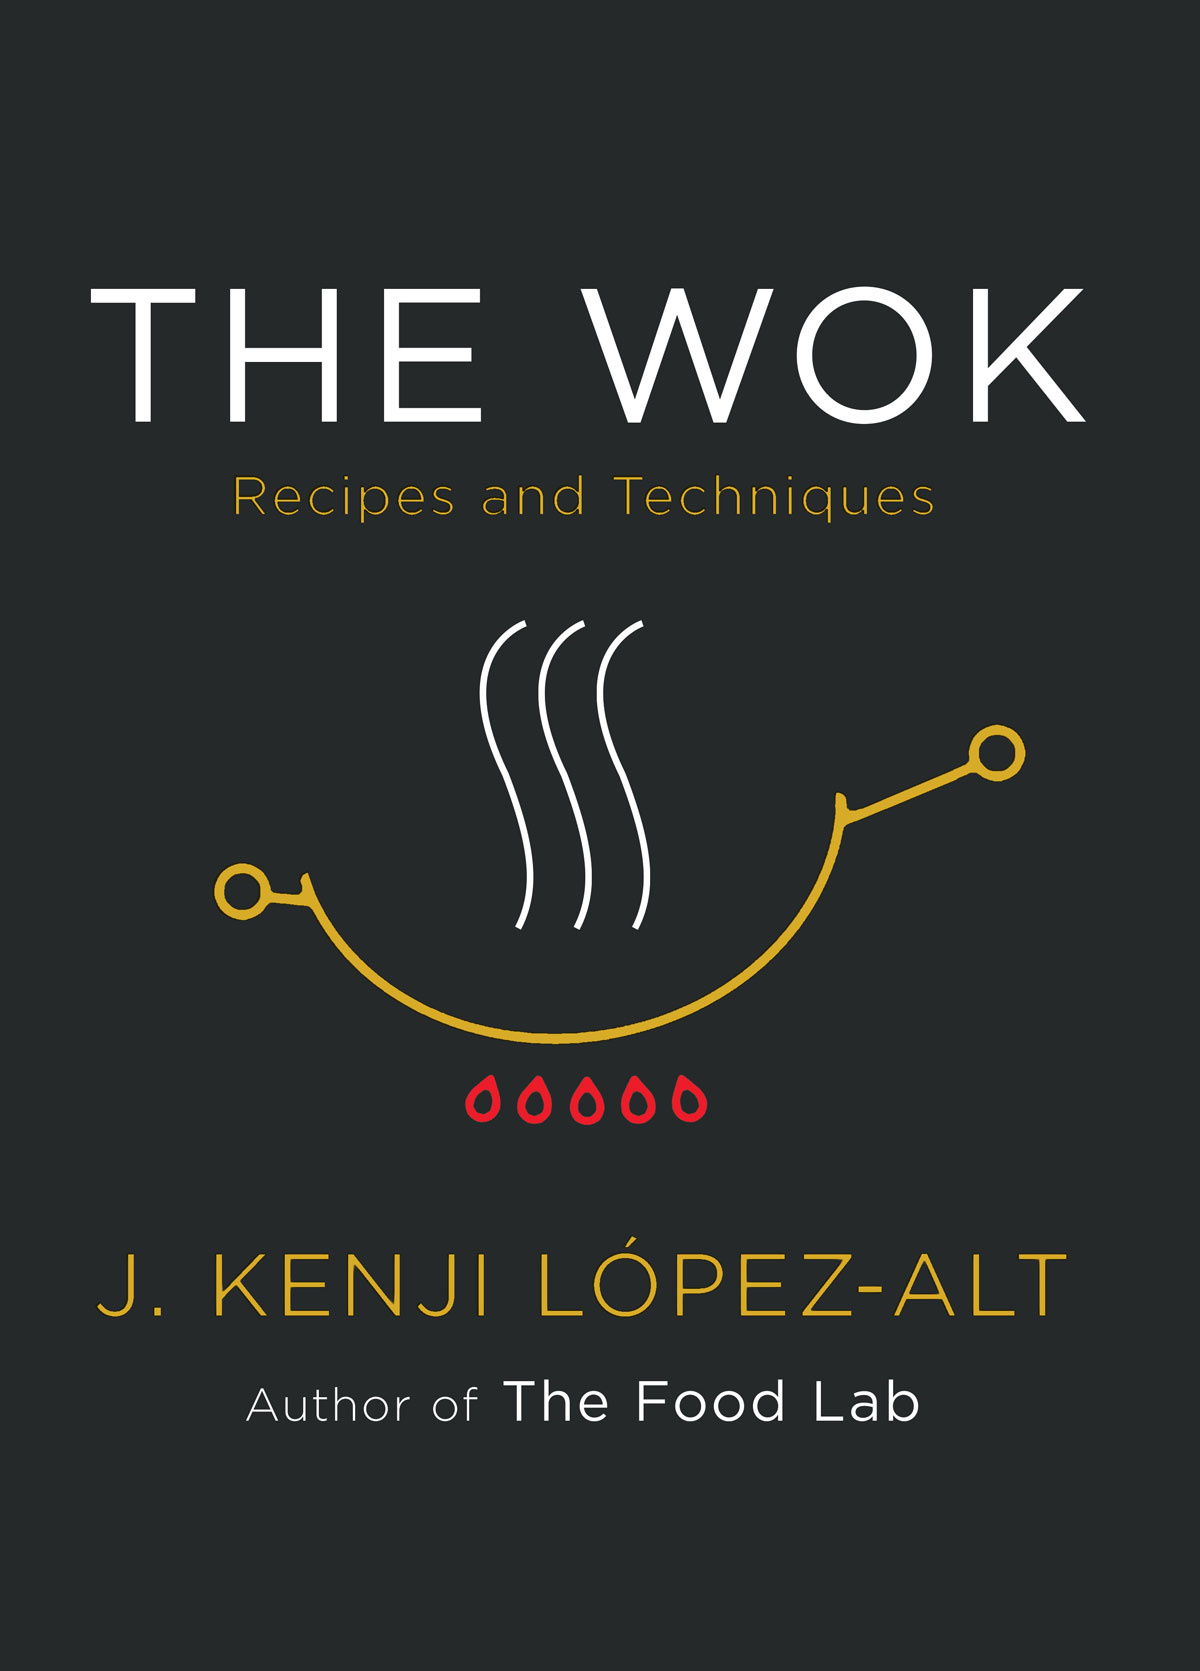 Book cover of The Wok by J. Kenji Lopez-Alt